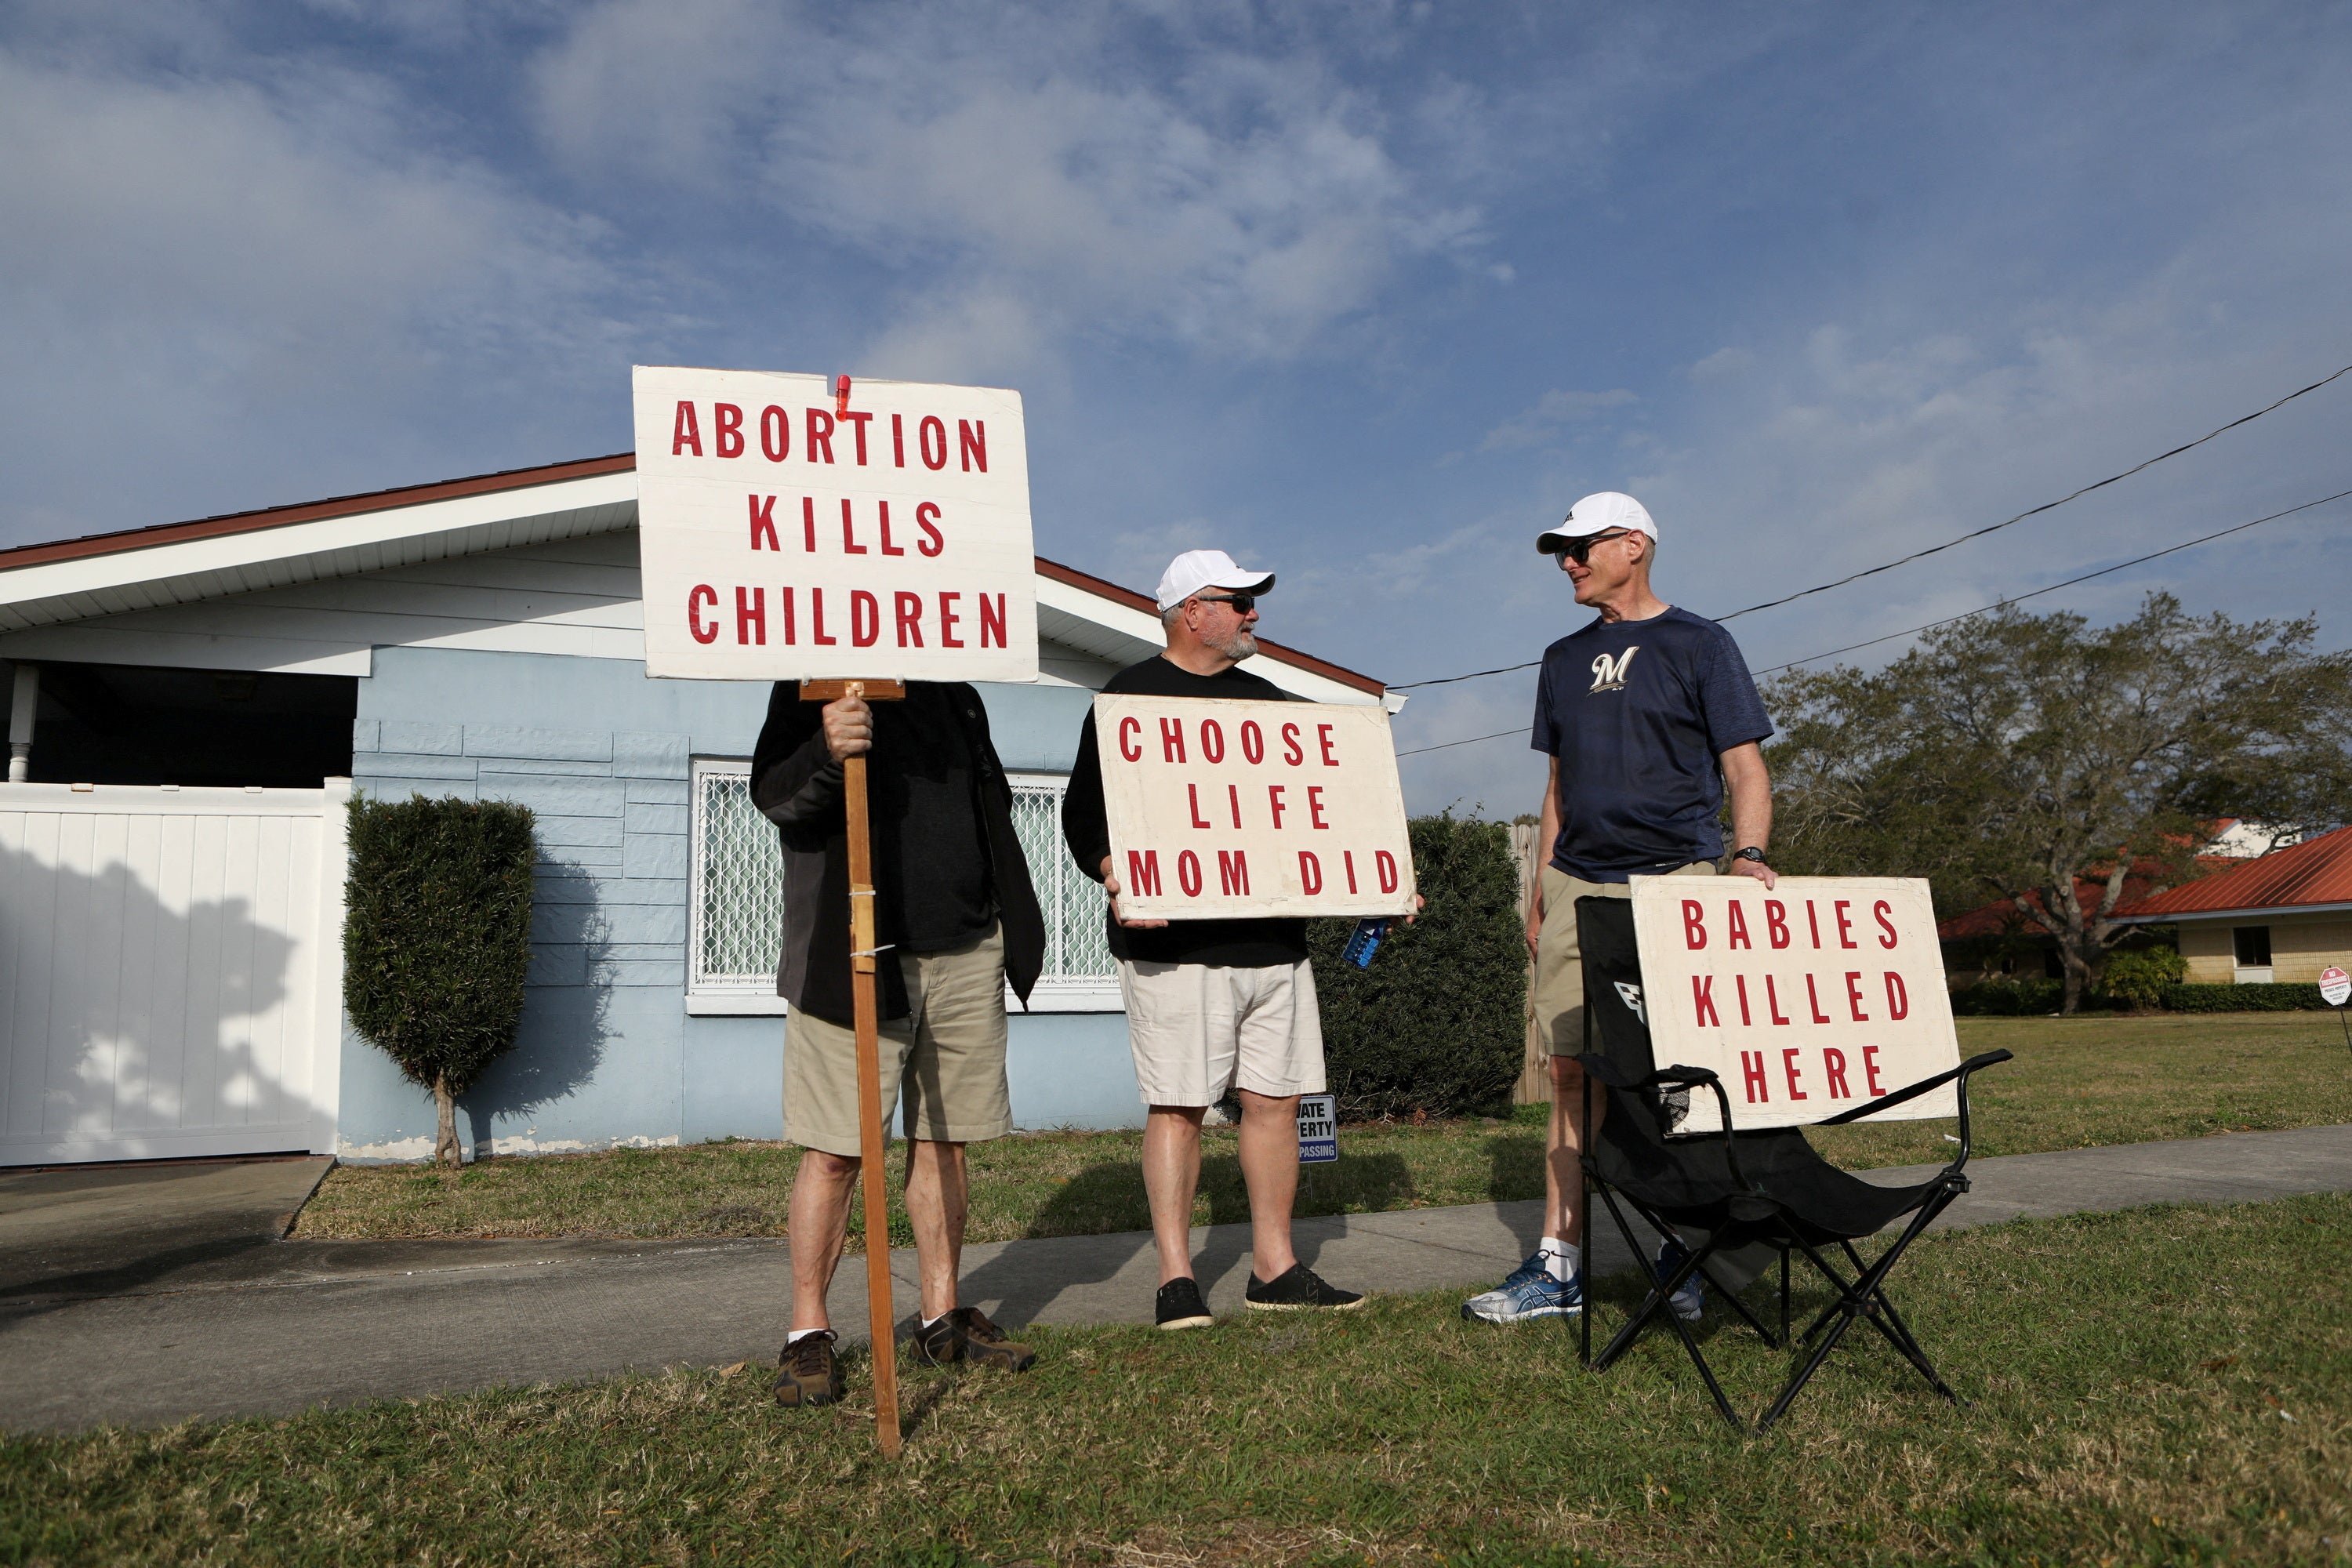 Men holding signs that say "Abortion kills children" and "Babies killed here" loiter outside of a small blue building, talking casually.